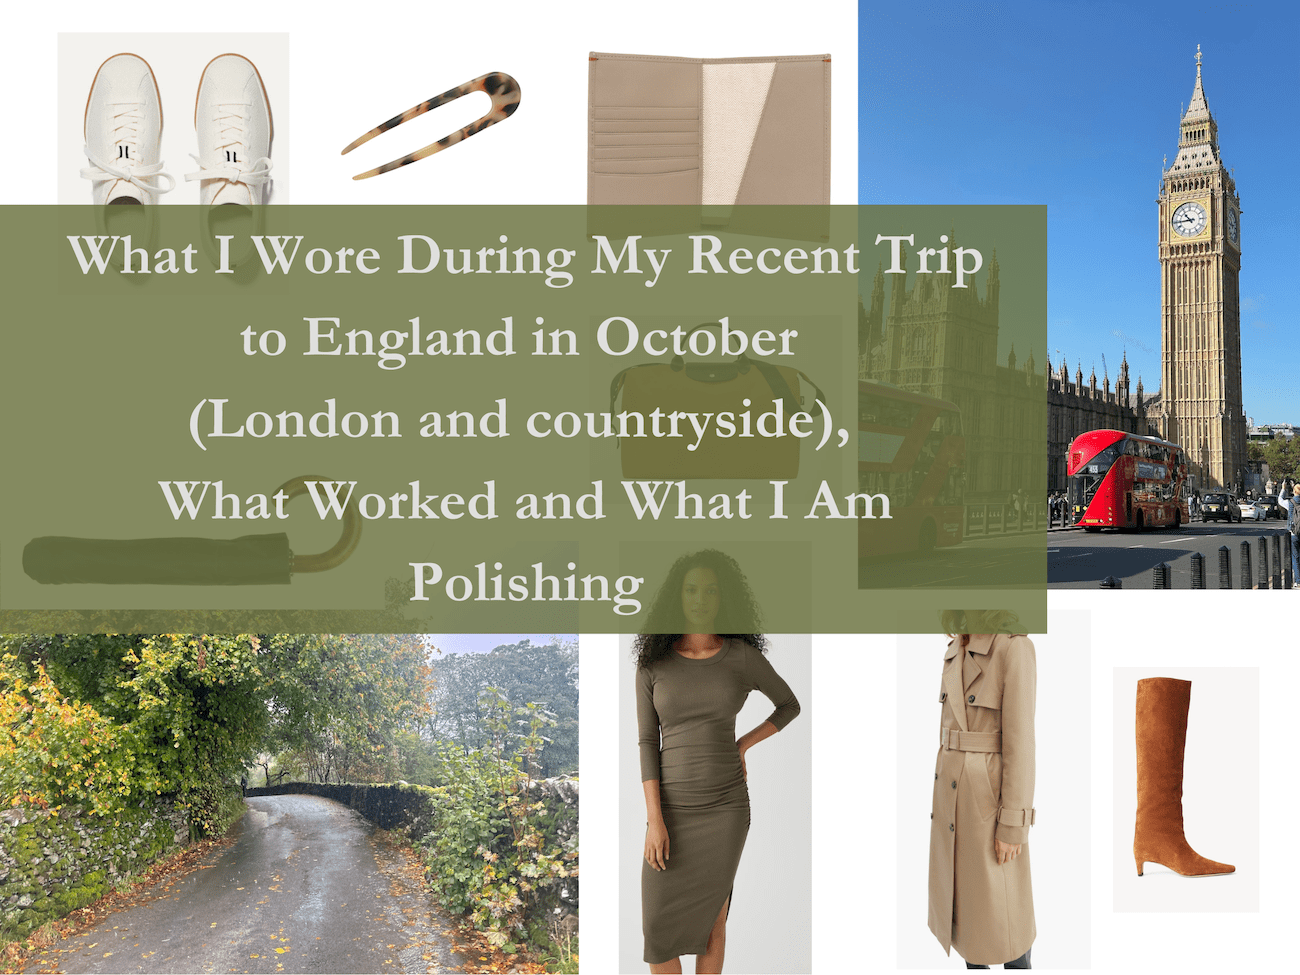 What I Wore During My Recent Trip to England in October (London and countryside), What Worked and What I Am Polishing